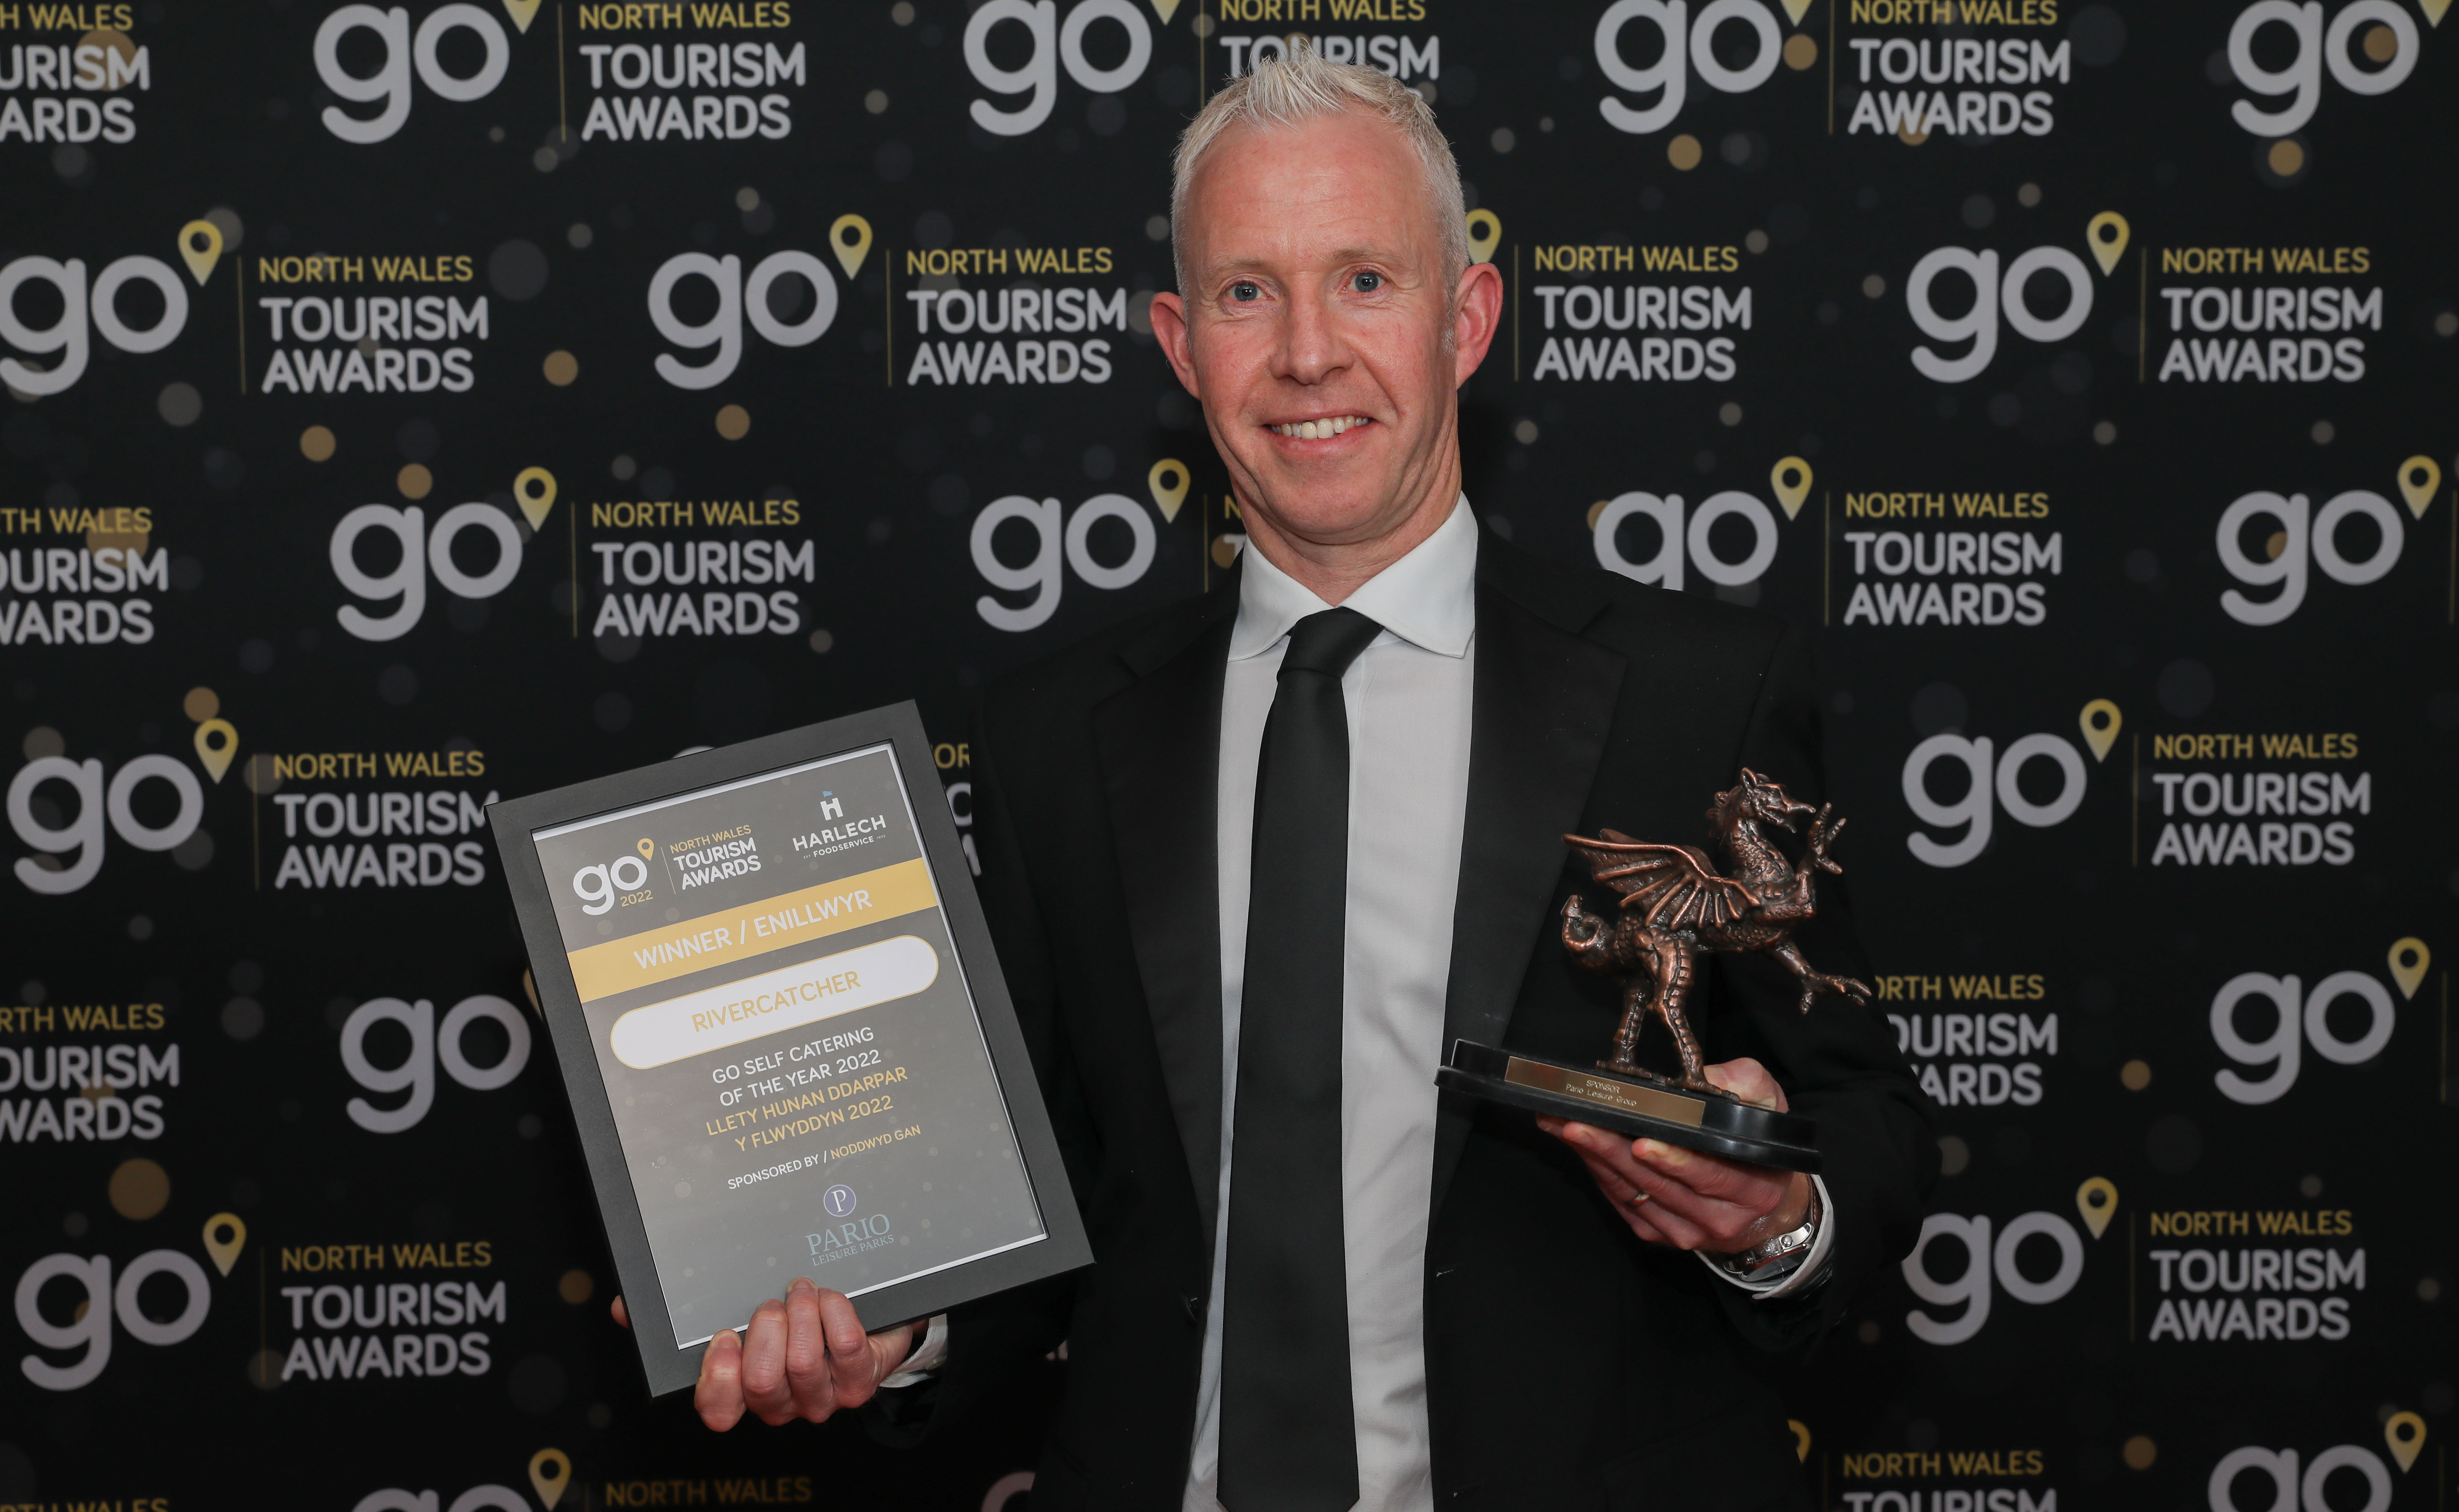 Ex-Premier League sports guru Andy on the ball with top tourism award